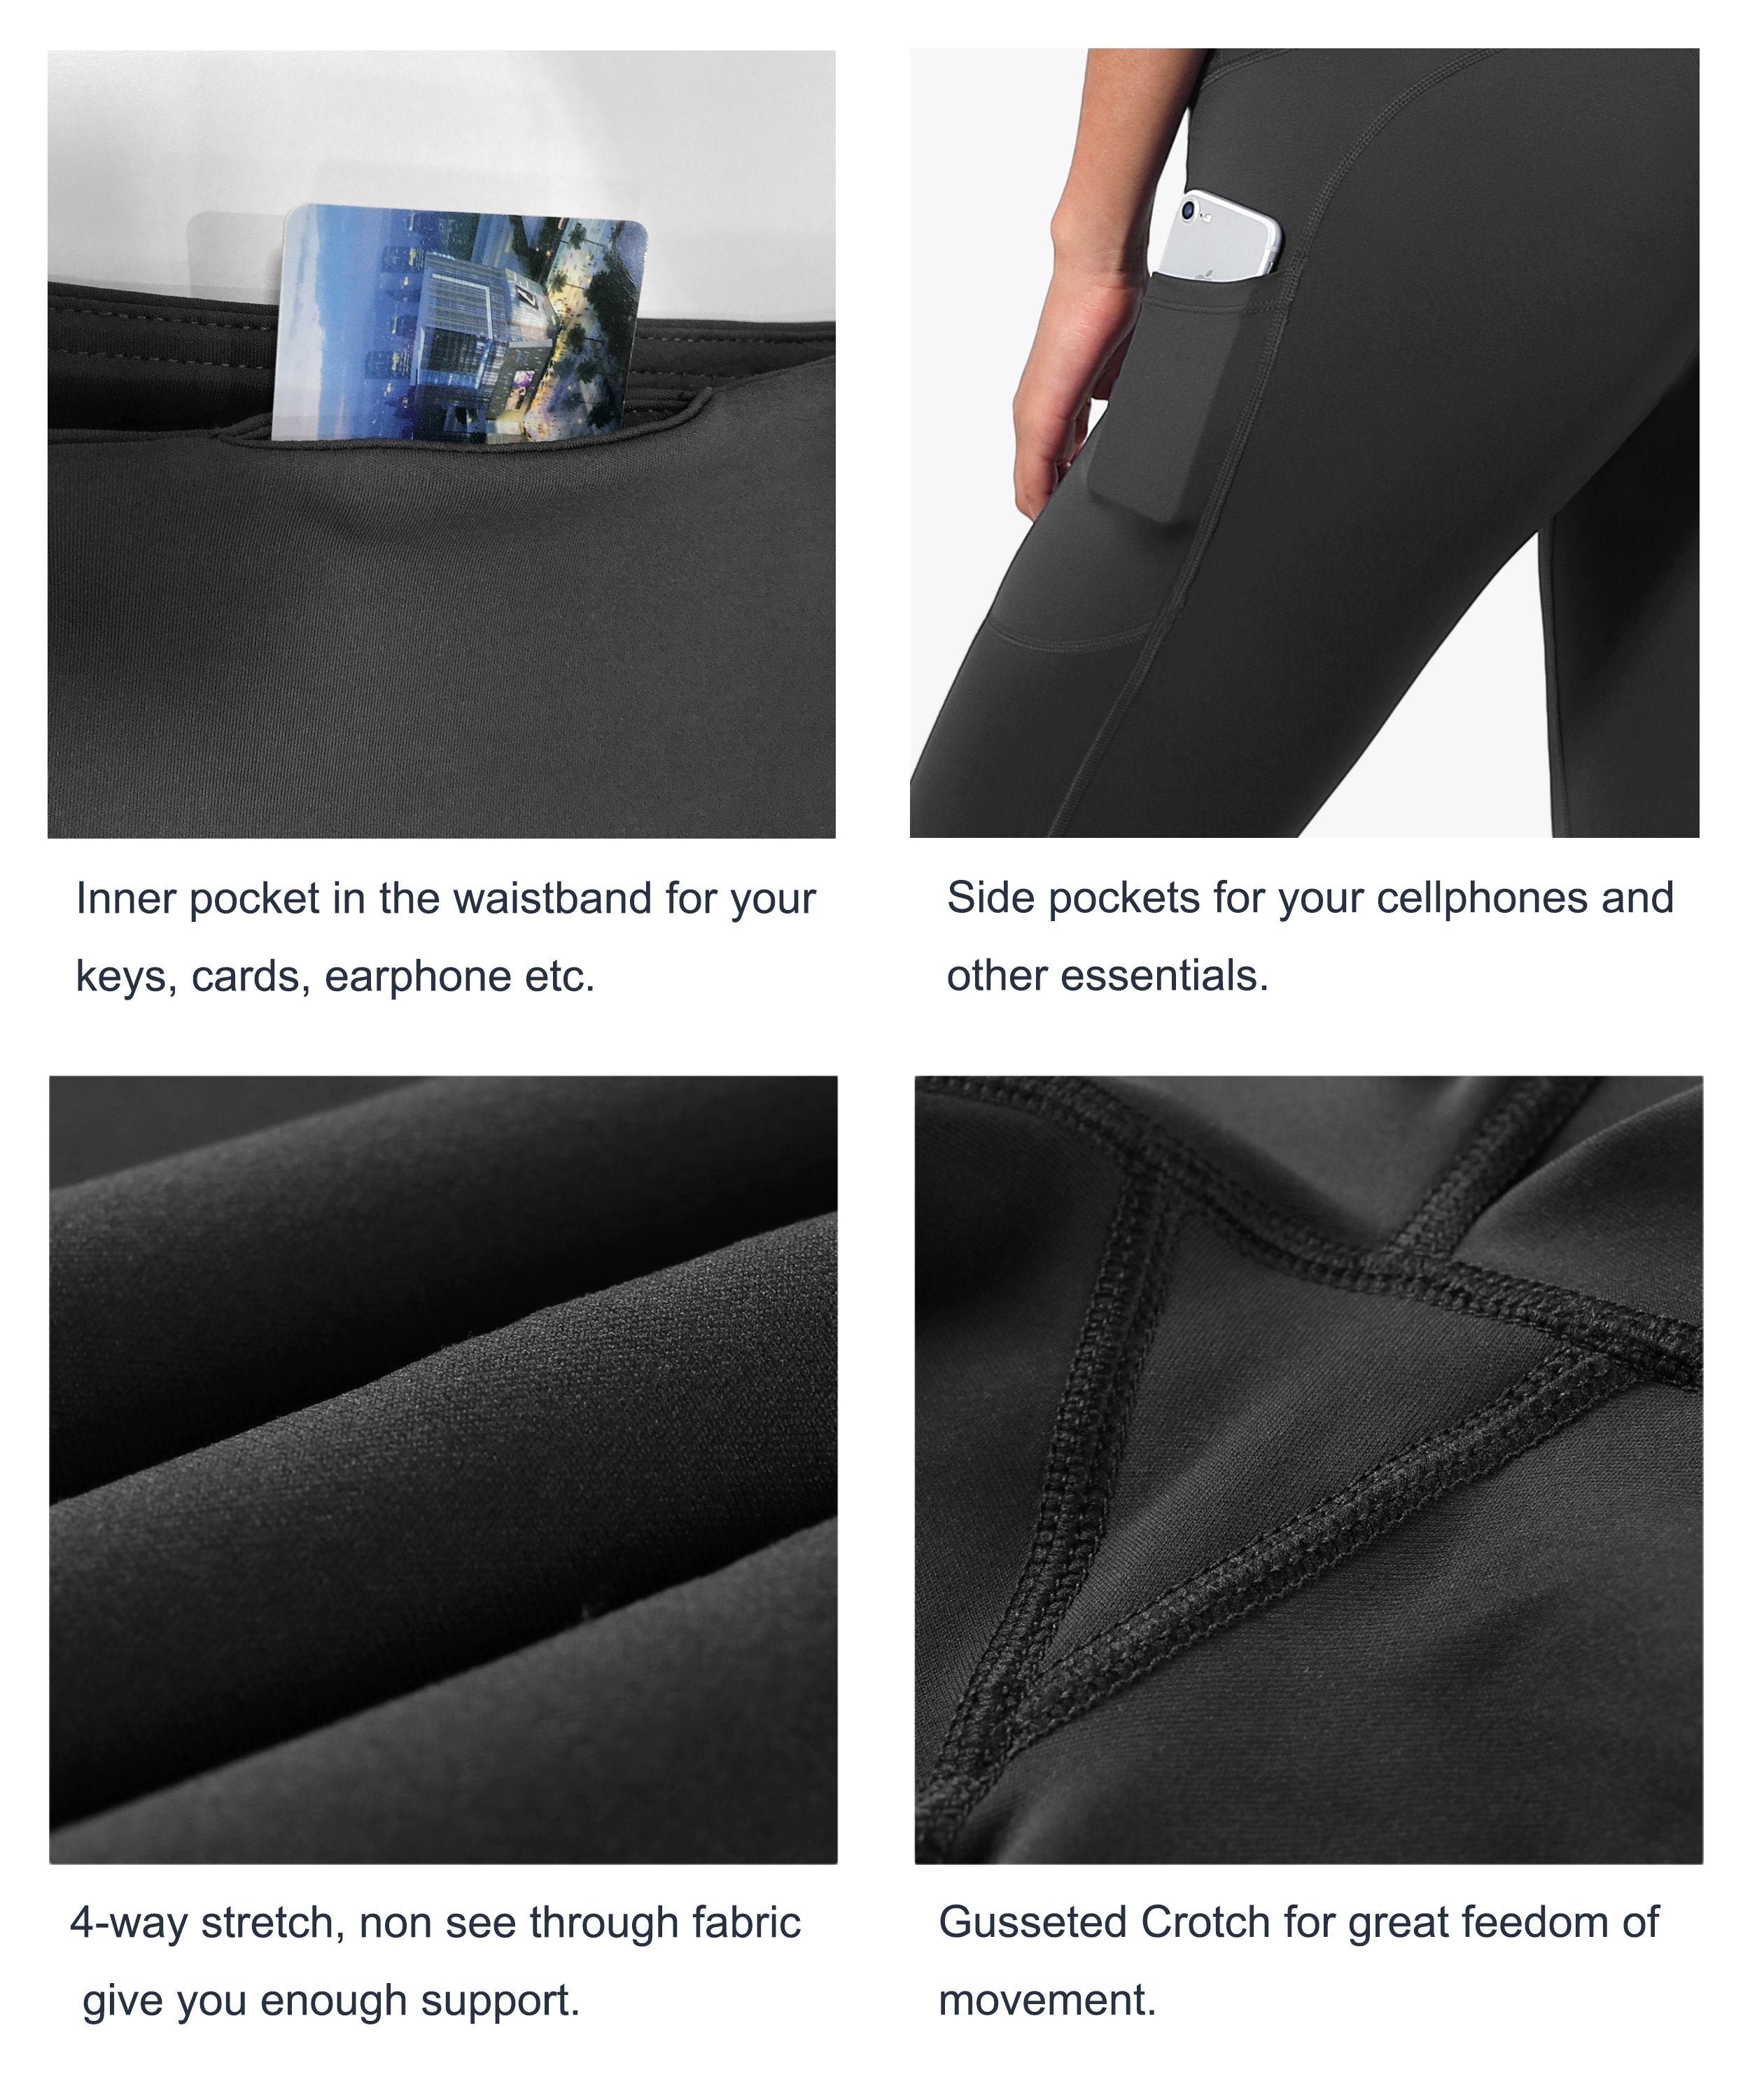 Hip Line Side Pockets Gym Pants shadowcharcoal Sexy Hip Line Side Pockets 75%Nylon/25%Spandex Fabric doesn't attract lint easily 4-way stretch No see-through Moisture-wicking Tummy control Inner pocket Two lengths